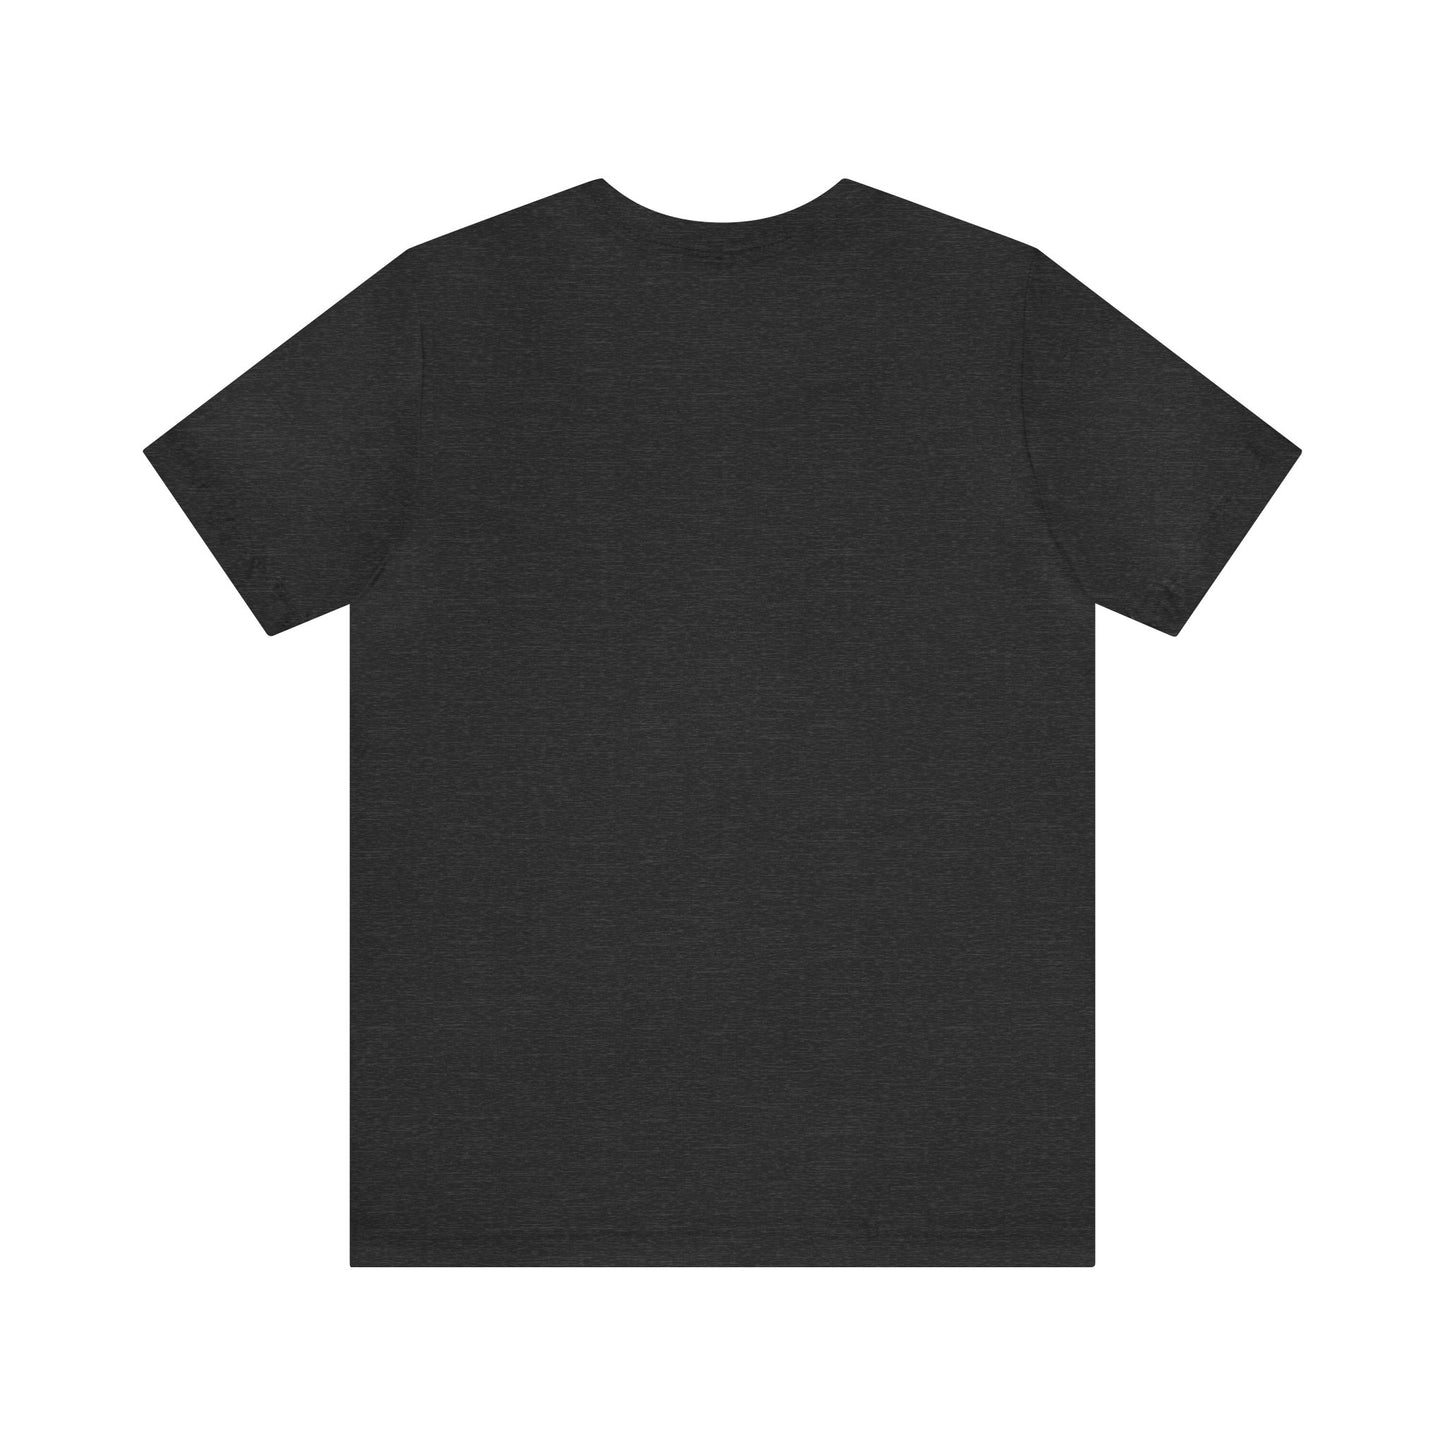 A Printify Unisex Jersey Short Sleeve Tee in plain dark gray, displayed on a white background, viewed from the back, featuring a subtle "Cabbagetown" print.